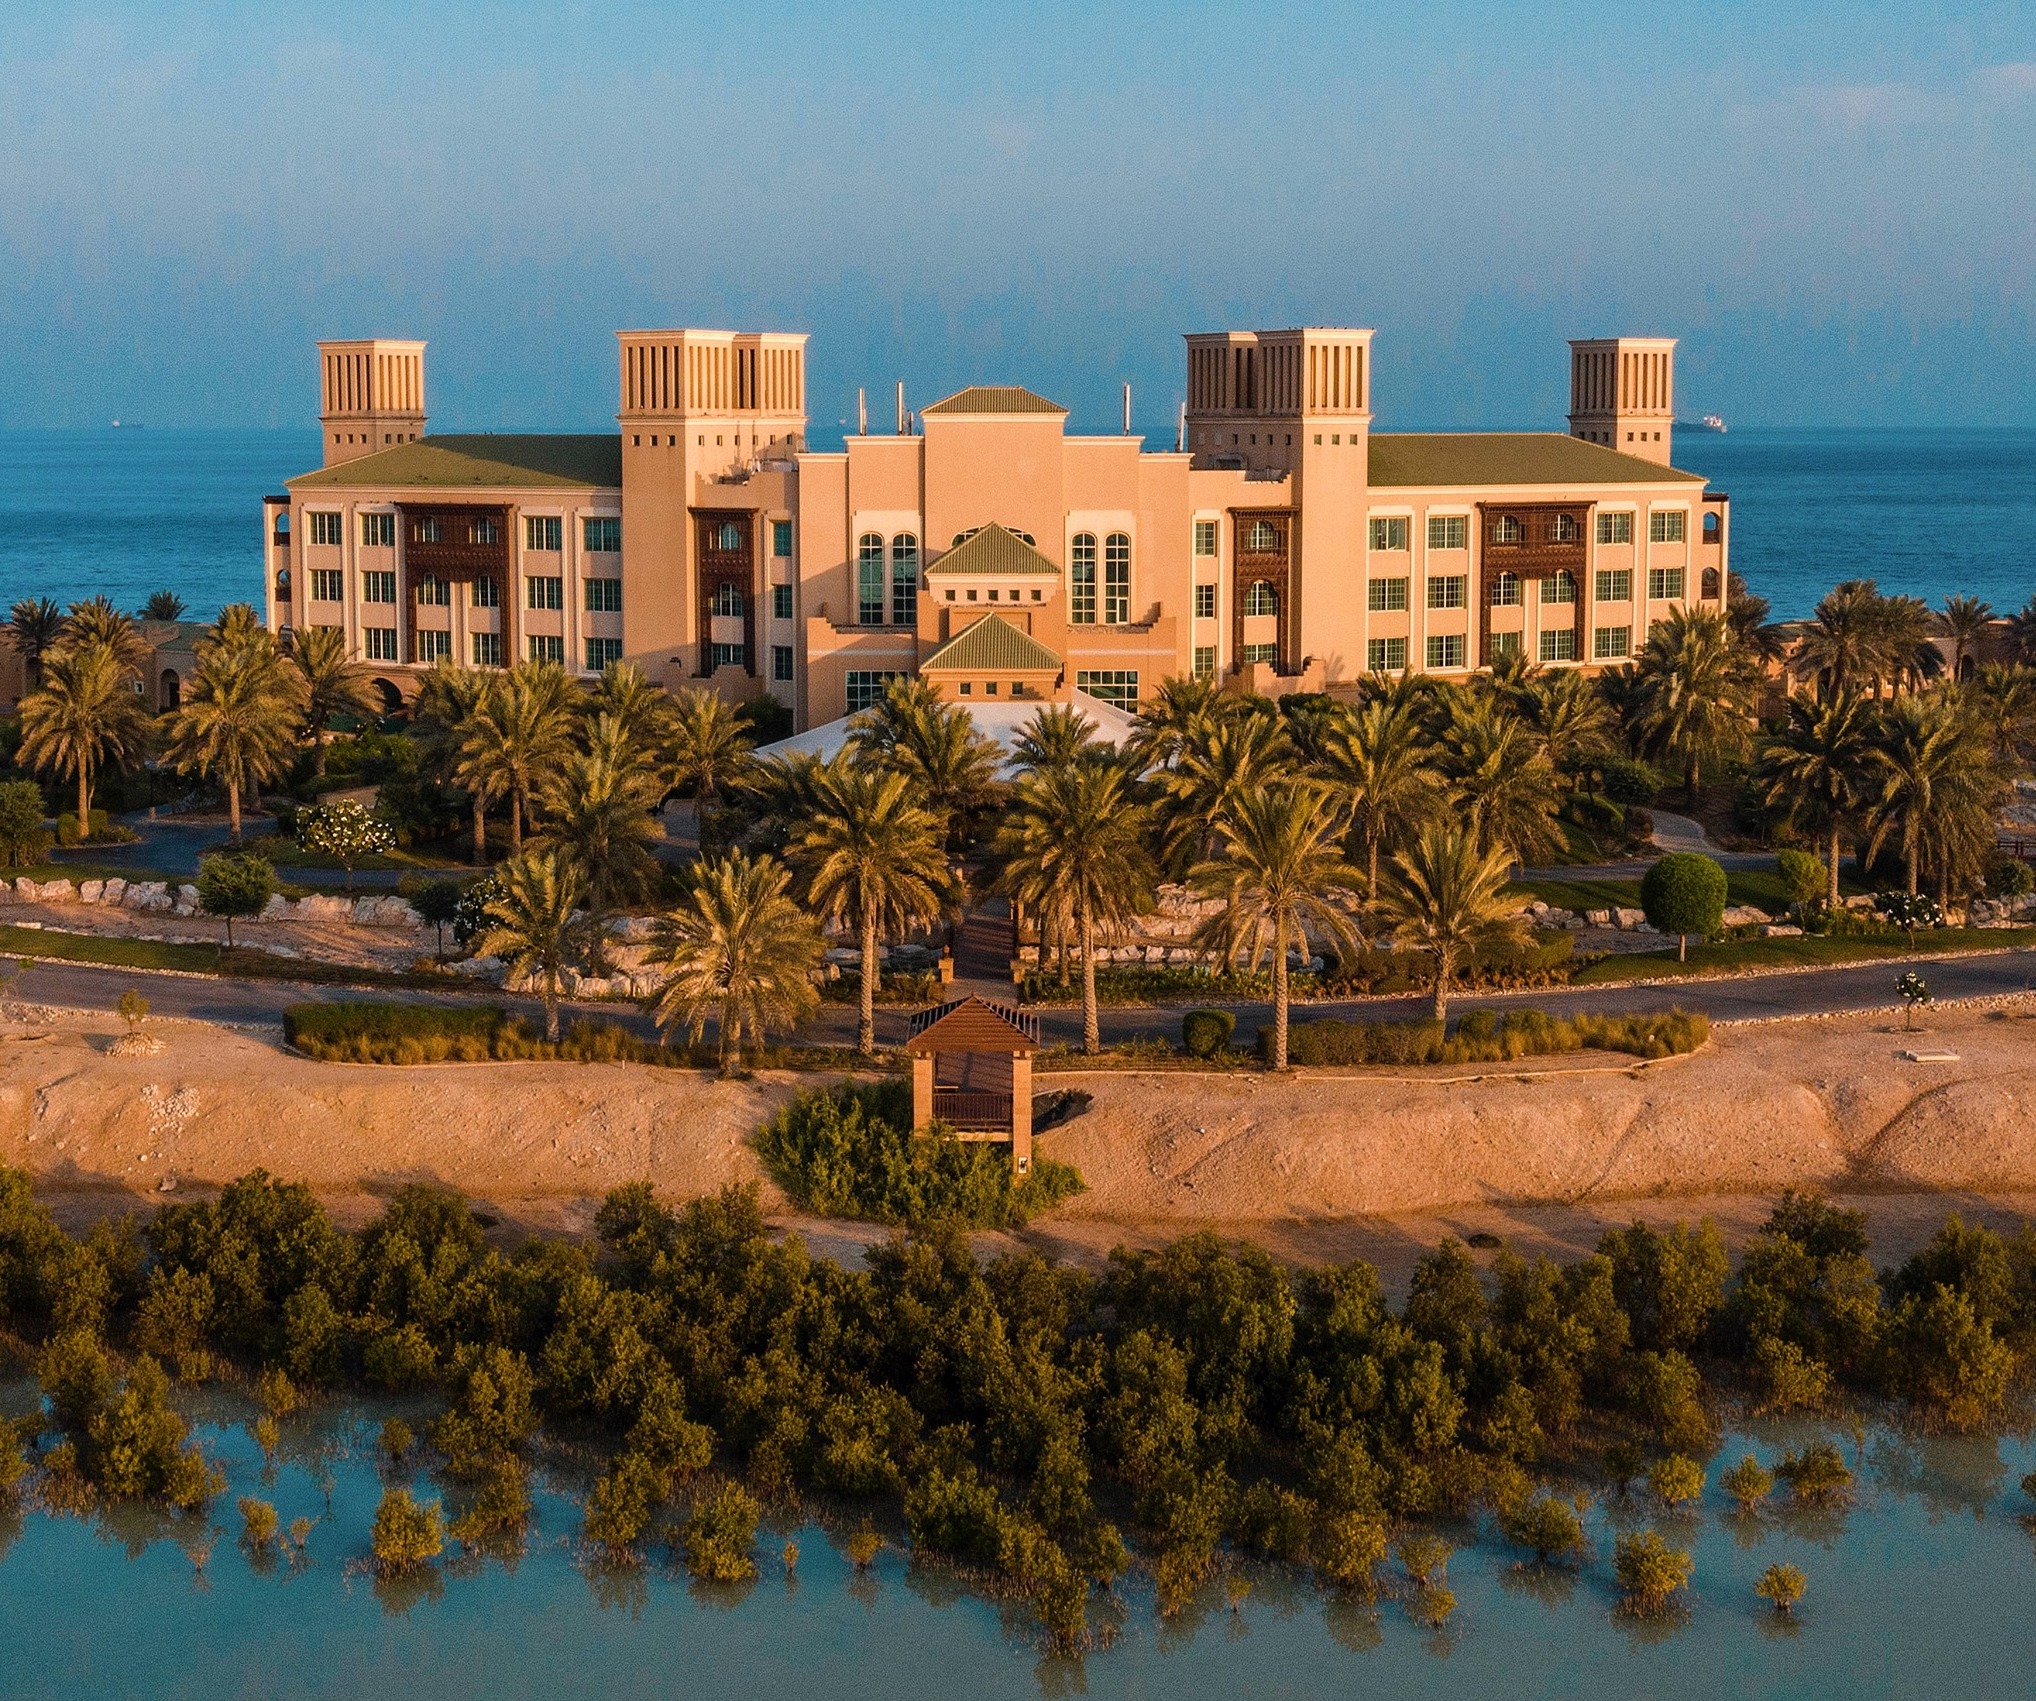 Abu Dhabi’s founding father had a vision for his private royal retreat on Sir Bani Yas Island, and years later, his legacy – and his hopes for the future – are reaching fruition.